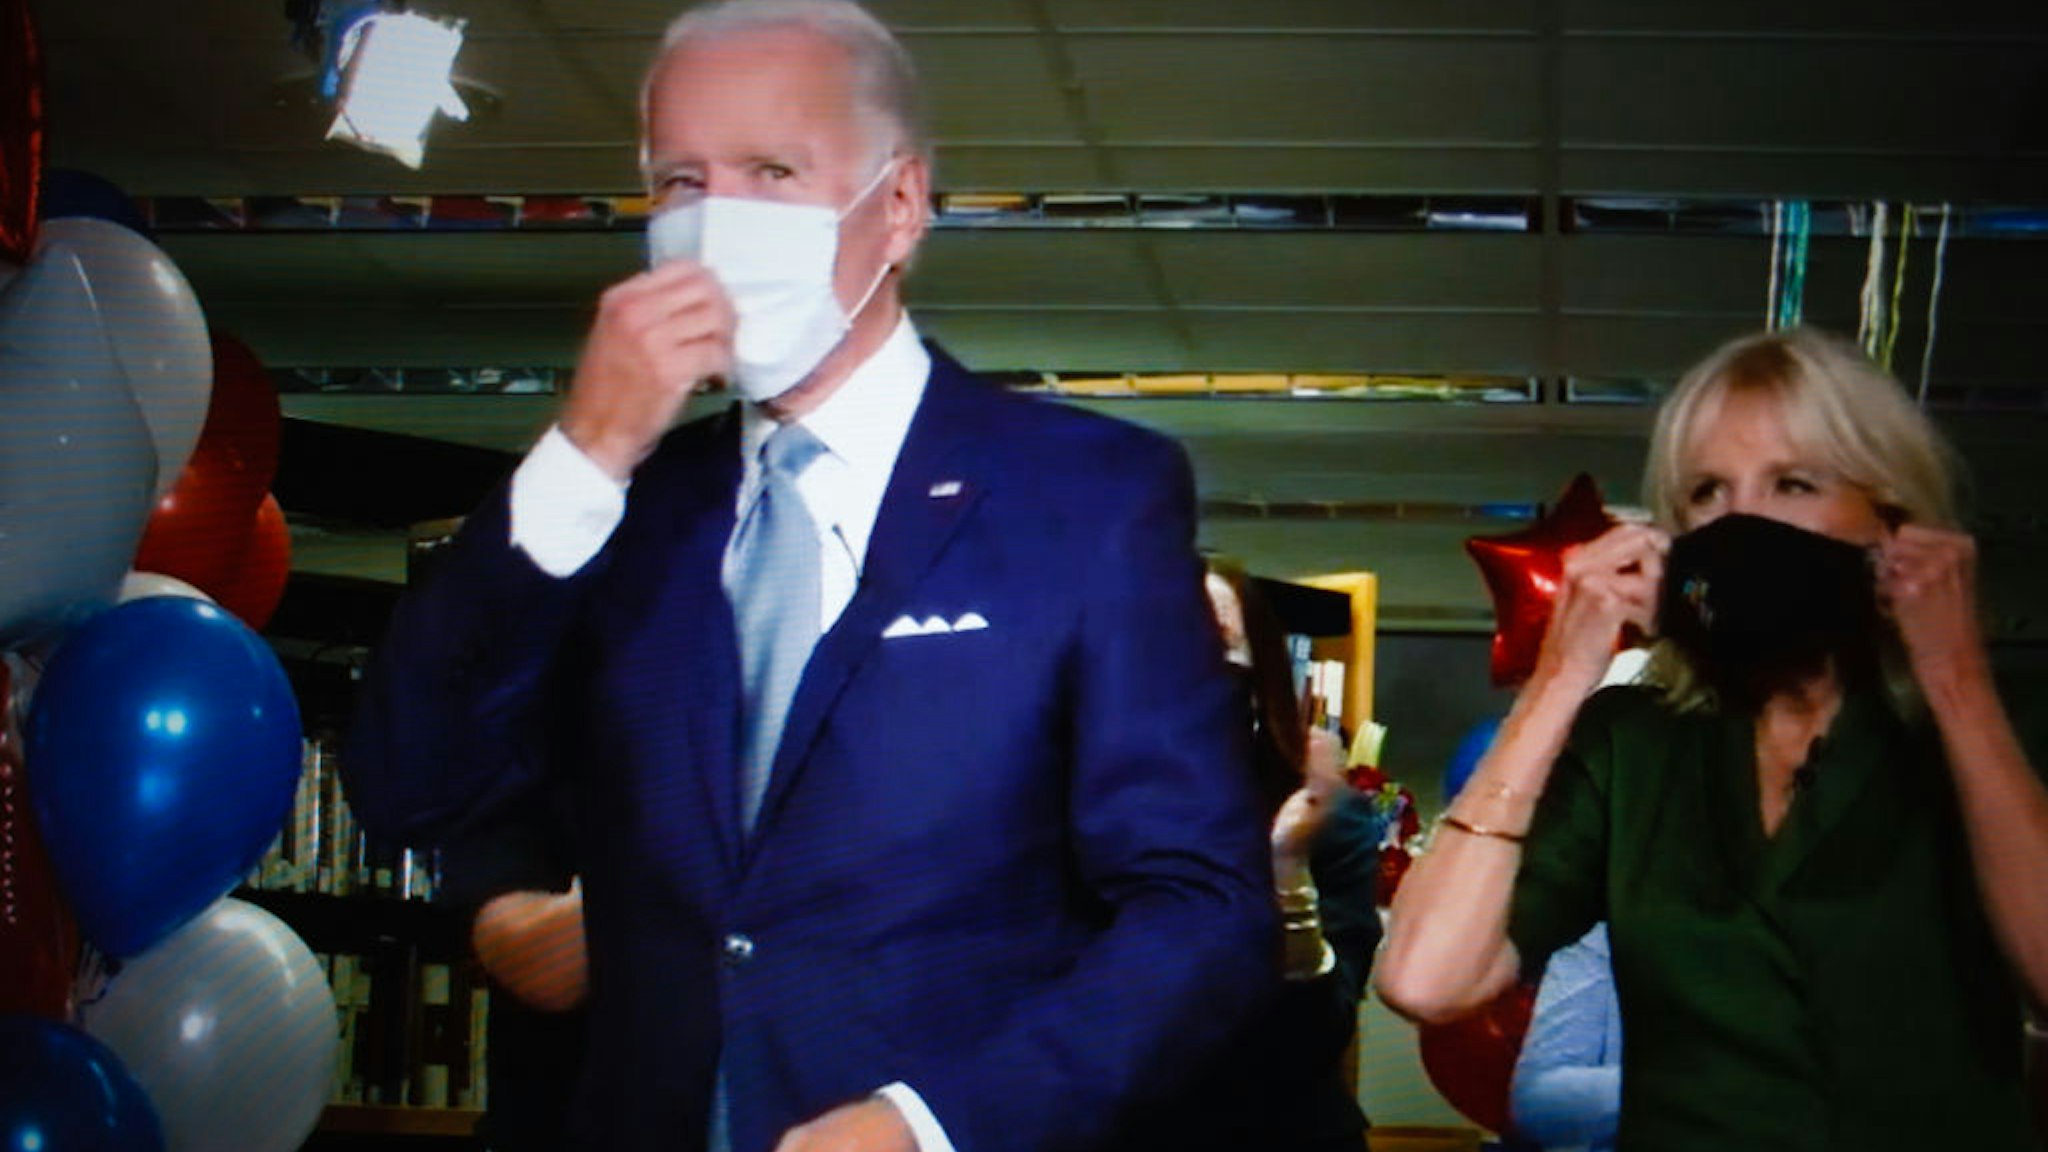 Former US Vice President Joe Biden, with wife Jill Biden, puts on a mask after formally becoming Democratic nominee for president during the virtual 2020 Democratic National Convention, livestreamed online and viewed on a laptop screen from London, England, on August 19, 2020. The four-day event, initially postponed from July, is taking place almost wholly remotely in response to the coronavirus pandemic. Biden will face President Donald Trump in the US presidential election on November 3. (Photo by David Cliff/NurPhoto via Getty Images)